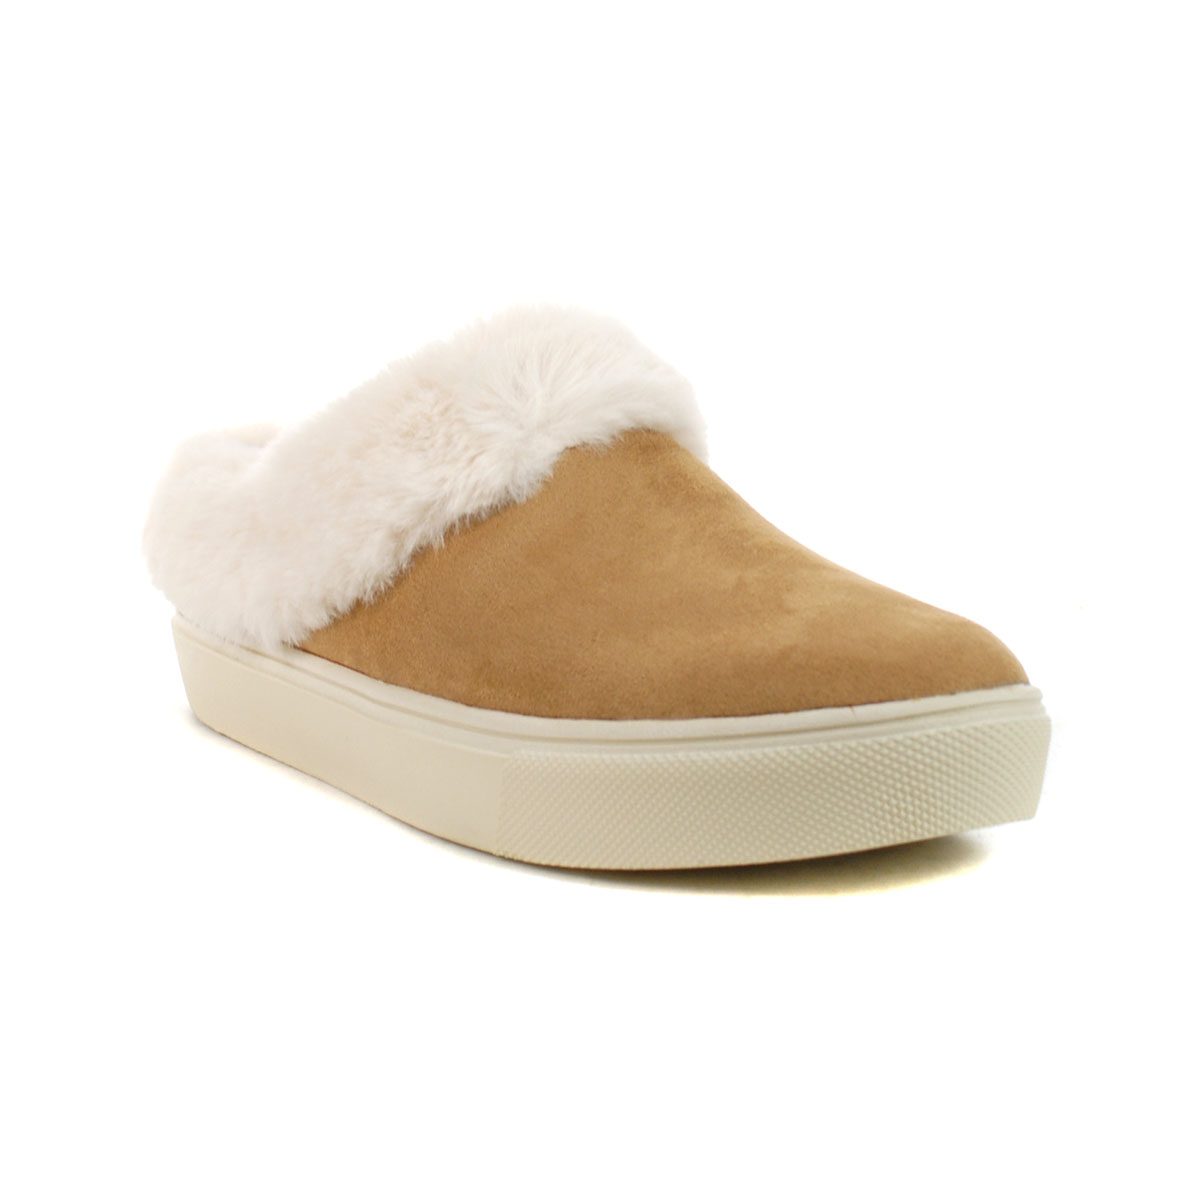 Dr. Scholl's Now Chill Tan Cozy Slippers H3047F1200 - WOOKI.COM